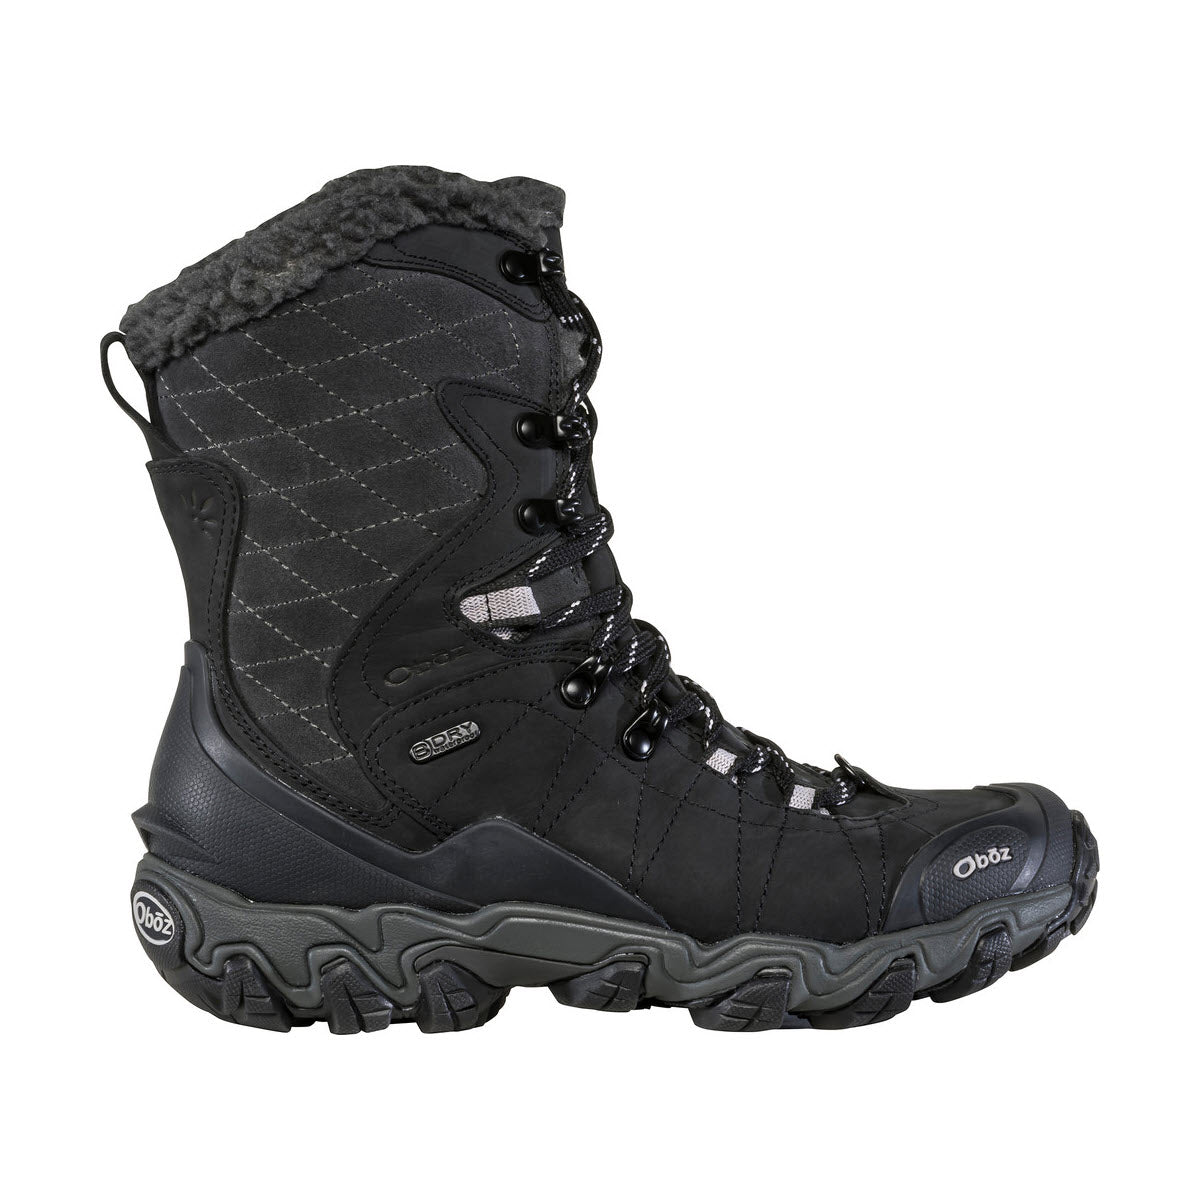 A Oboz Bridger 9&quot; Insulated B-Dry Black Sea hiking boot with quilted detailing, fur lining at the collar, and a rugged sole, branded with the Oboz logo.